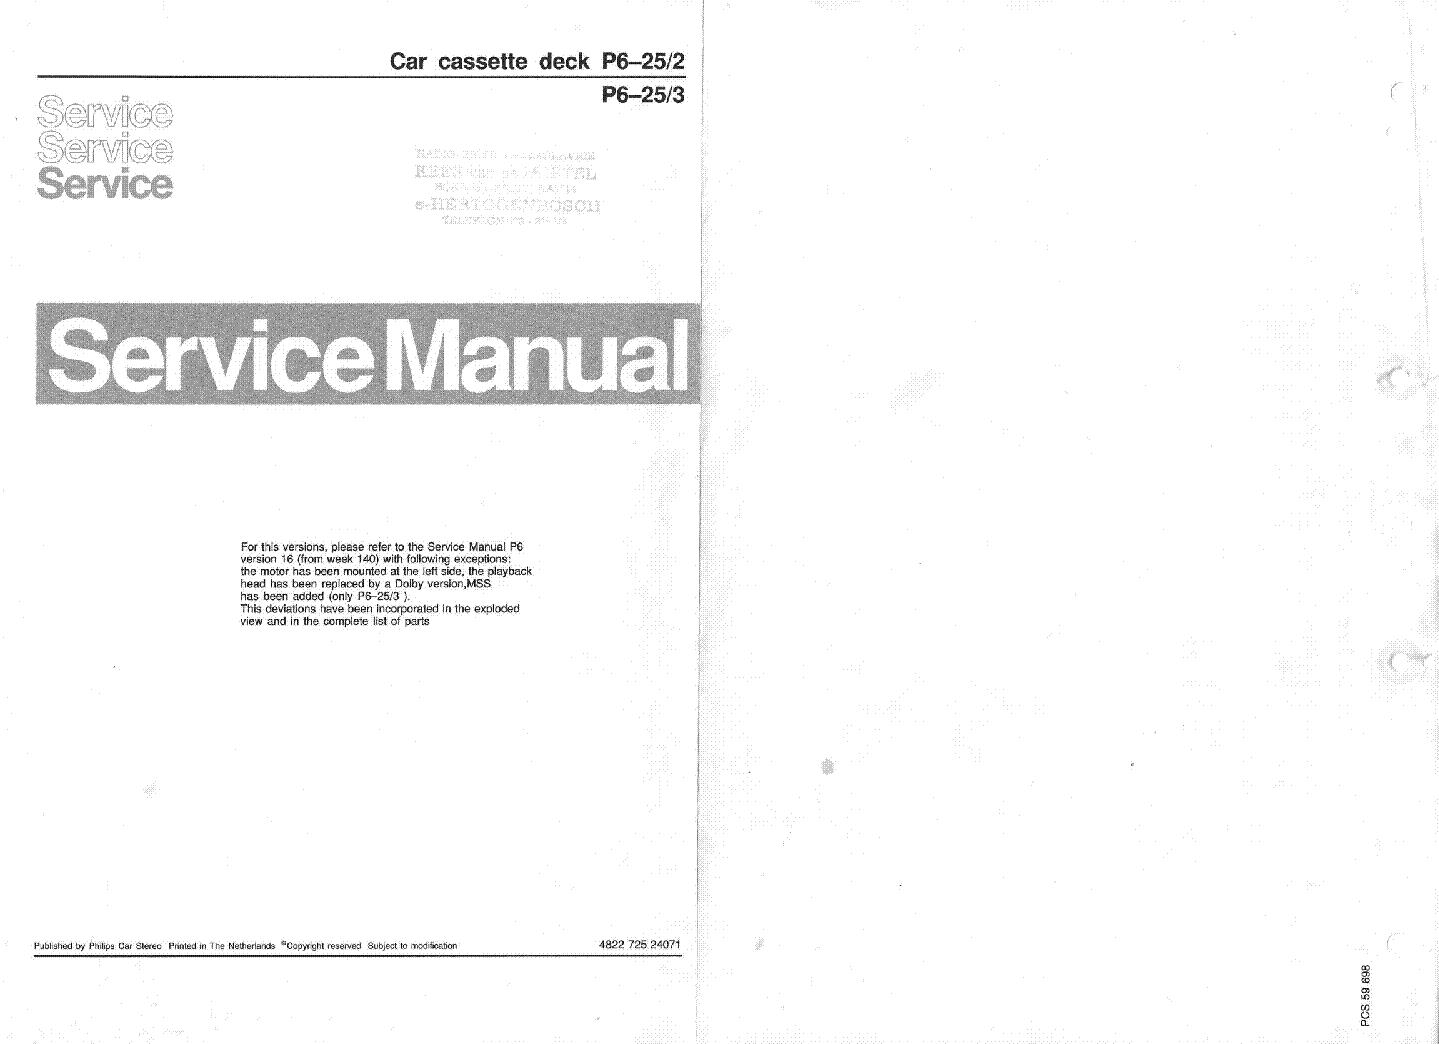 PHILIPS P62523 SM CARCASSETTEDECK Service Manual download